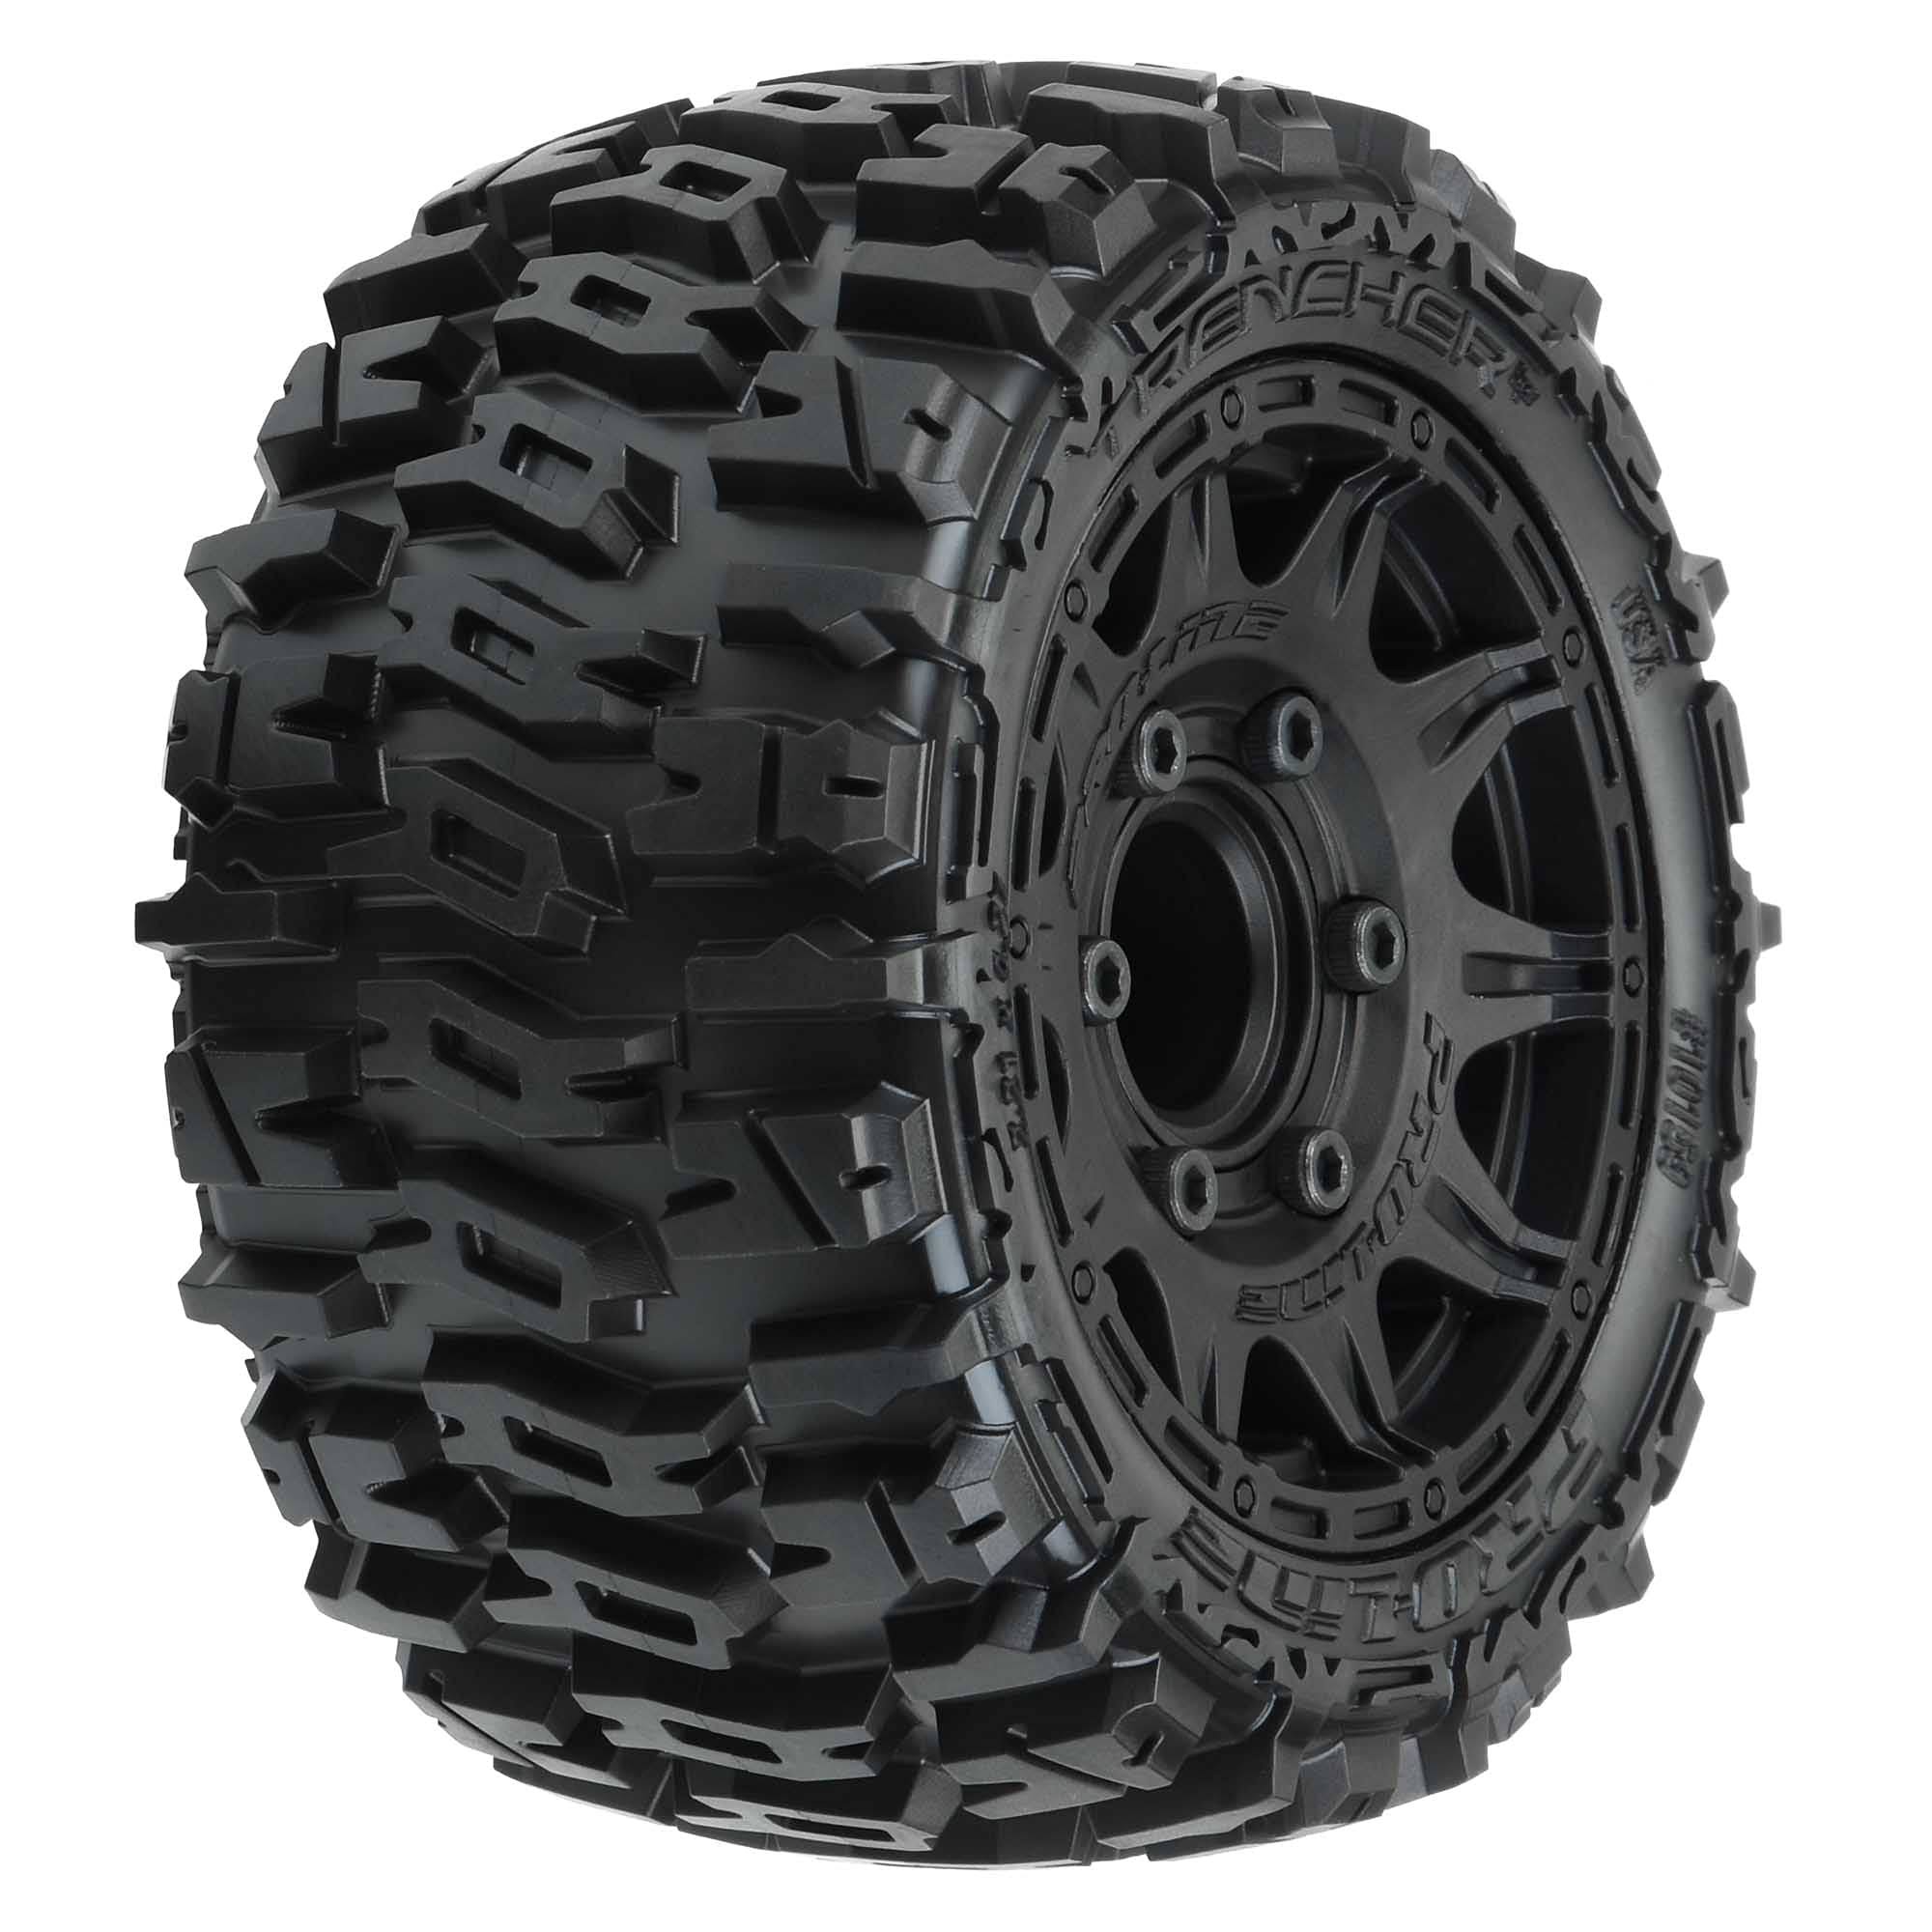 Trencher LP 2.8" All Terrain Tires Mounted on Raid Black